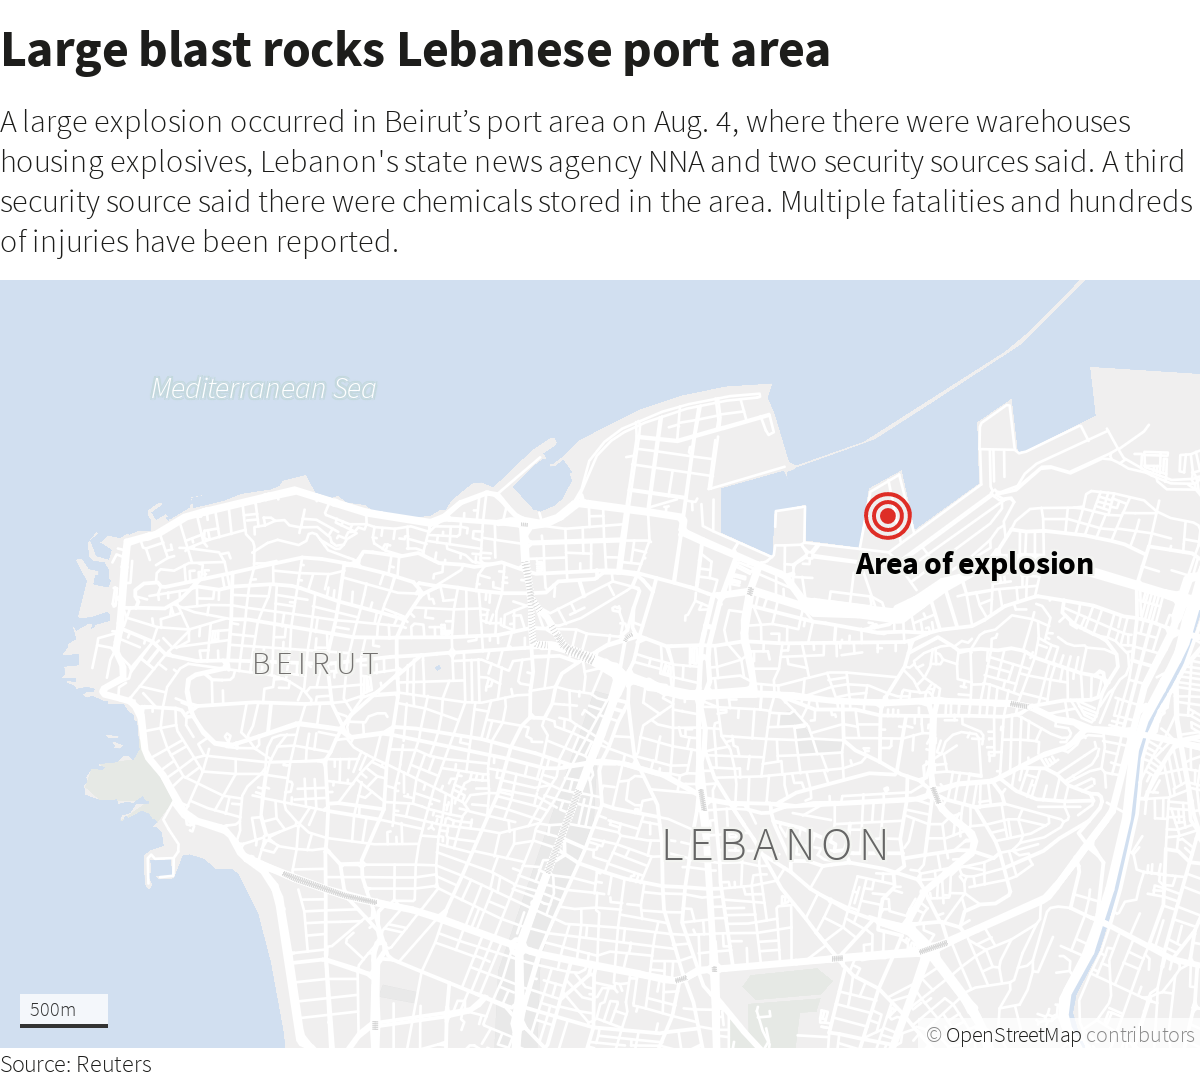 Lebanon's interior minister says initial information indicates highly explosive material seized years ago blew up, though the cause of explosion won't be determined until an investigation is complete  https://graphics.reuters.com/LEBANON-SECURITY/BLAST/xklvydjjqpg/chart.png